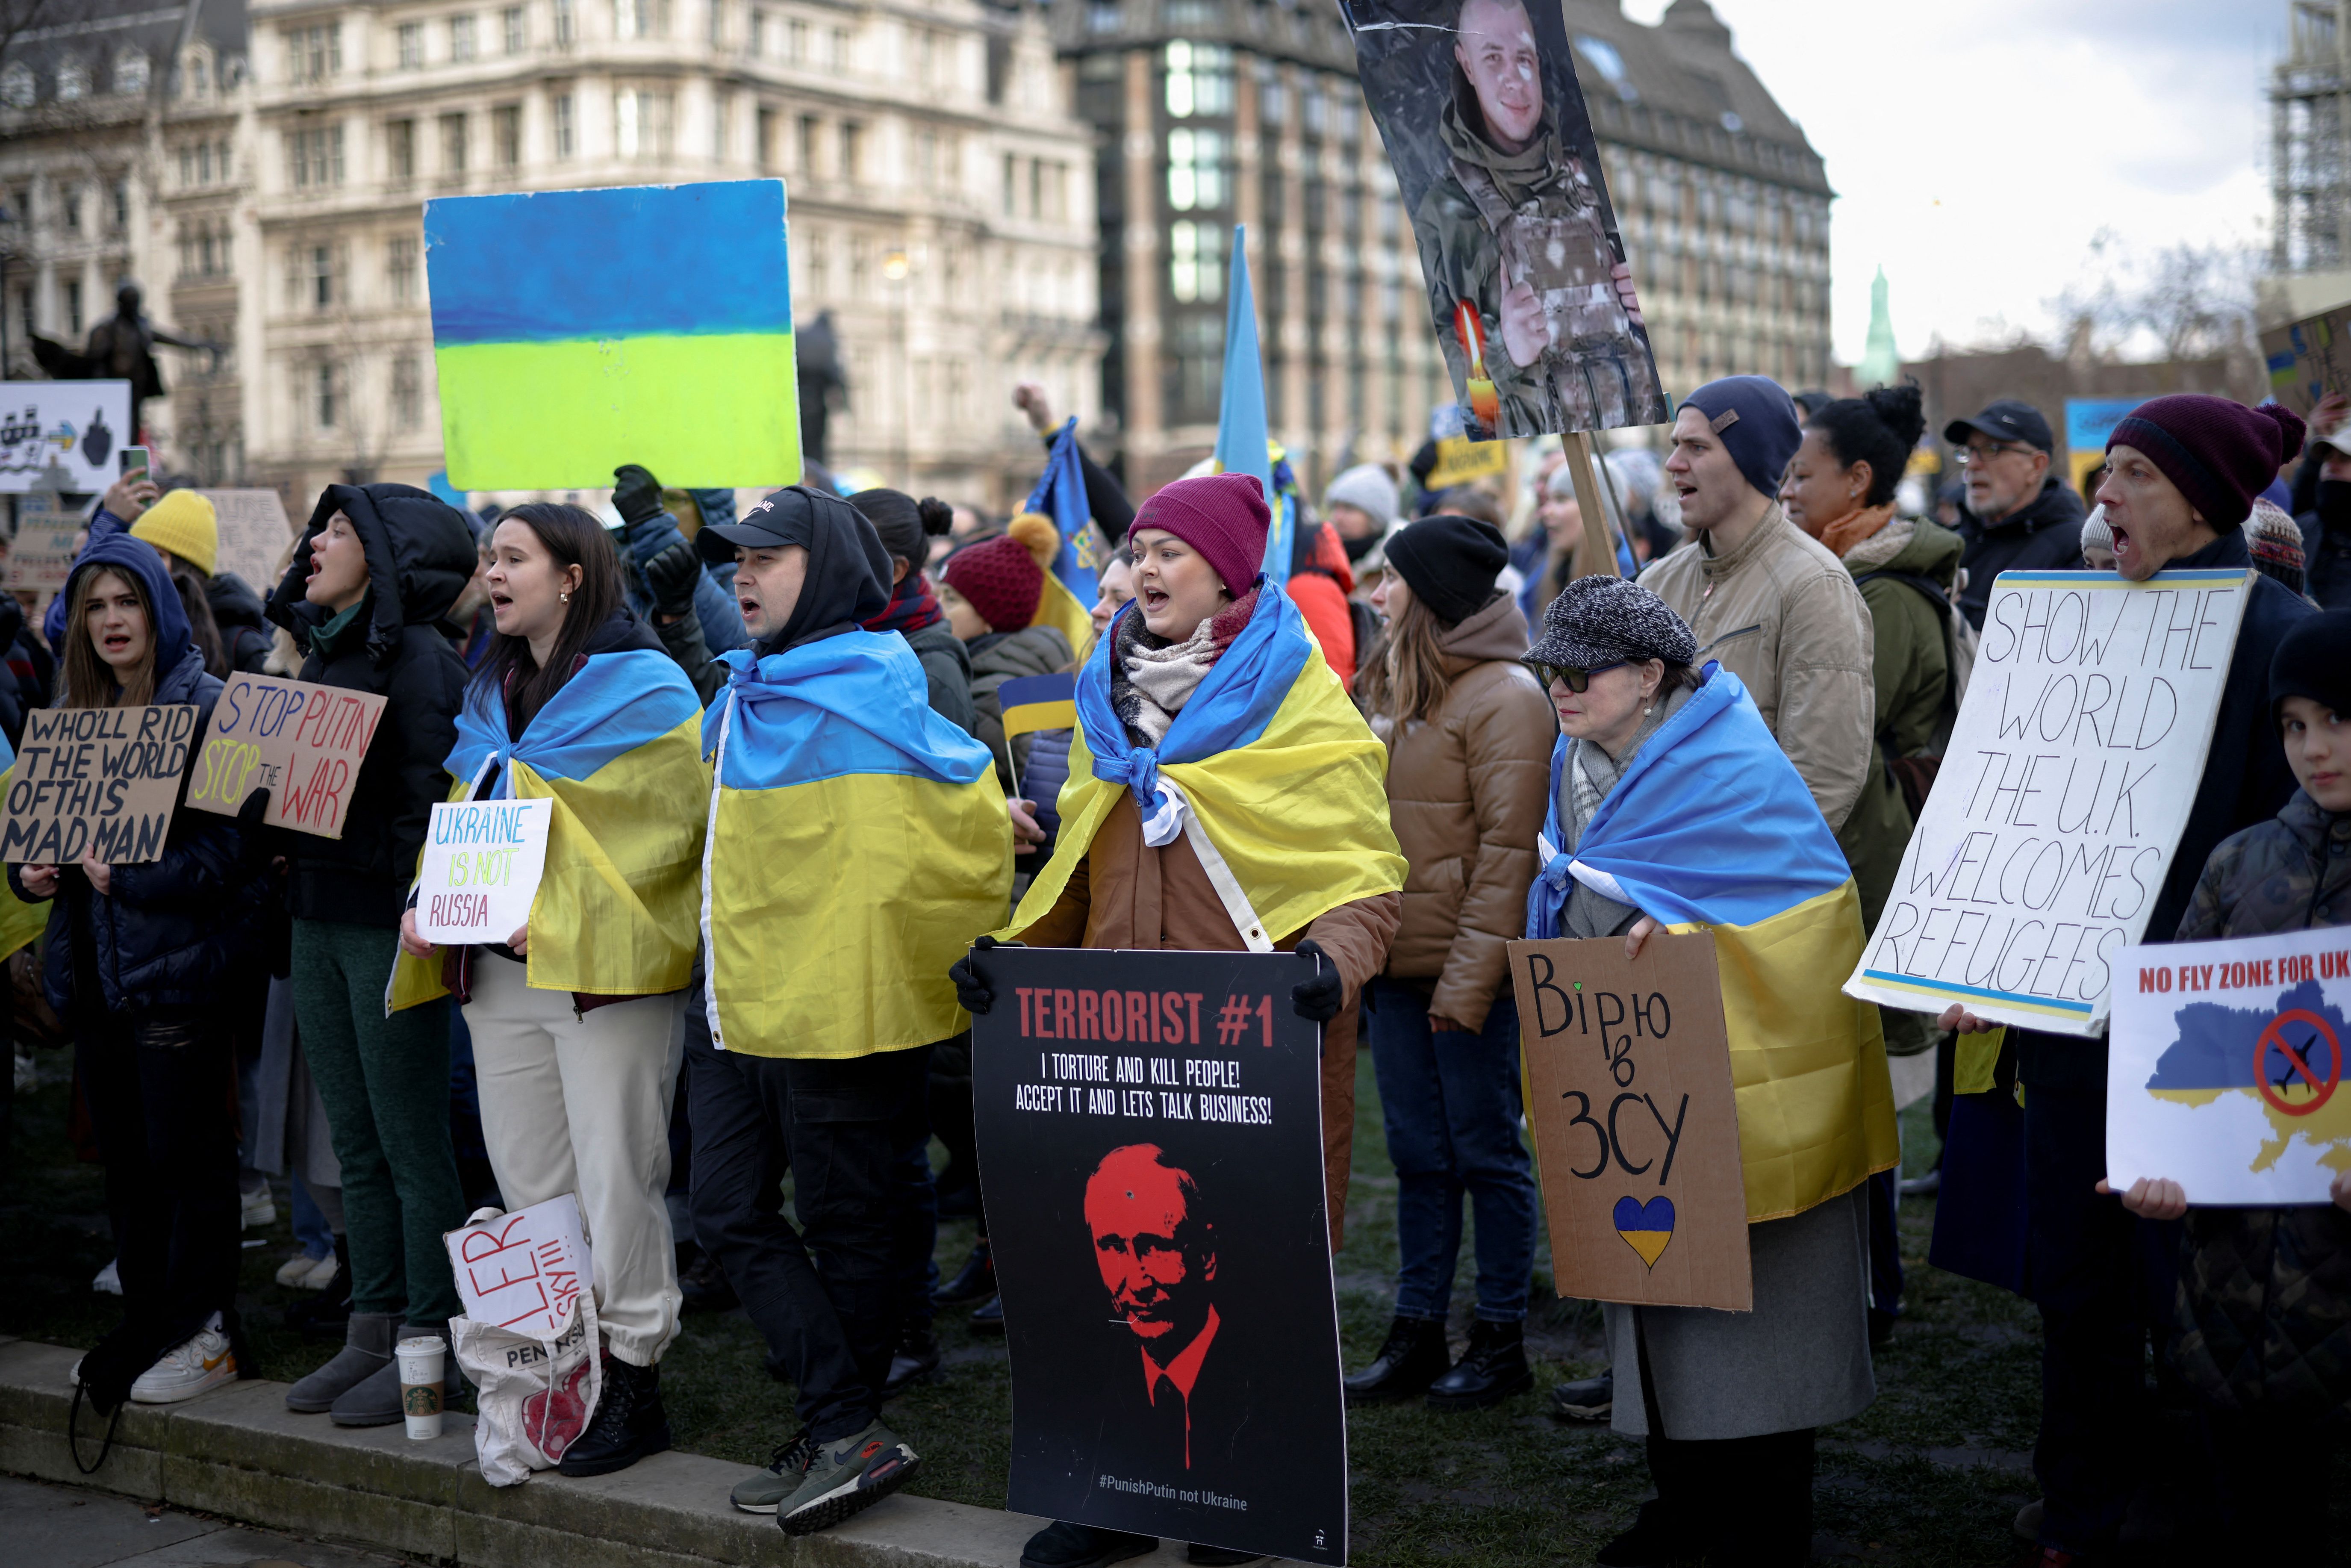 People attend a protest against the Russian invasion of the Ukraine, in Parliament Square in London, Britain.  (REUTERS/Henry Nicholls).